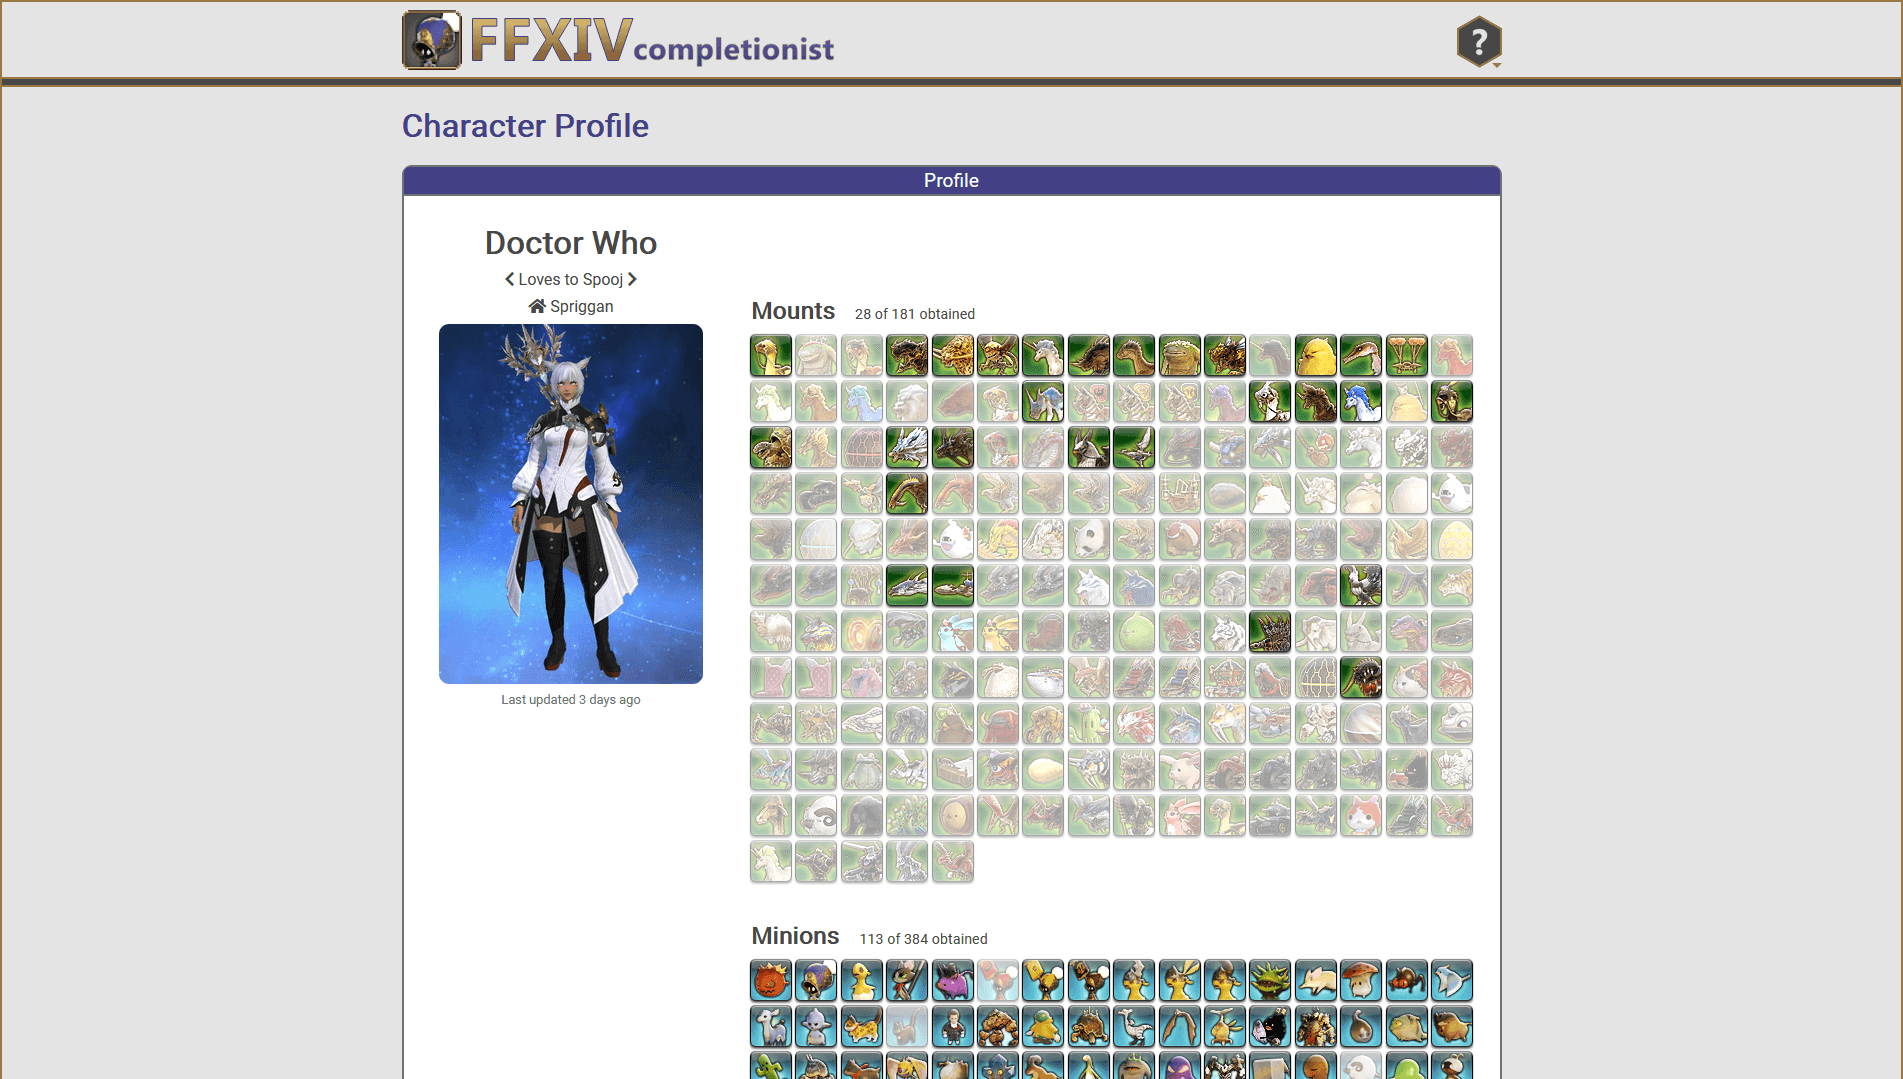 Dashboard page for FFXIV Completionist